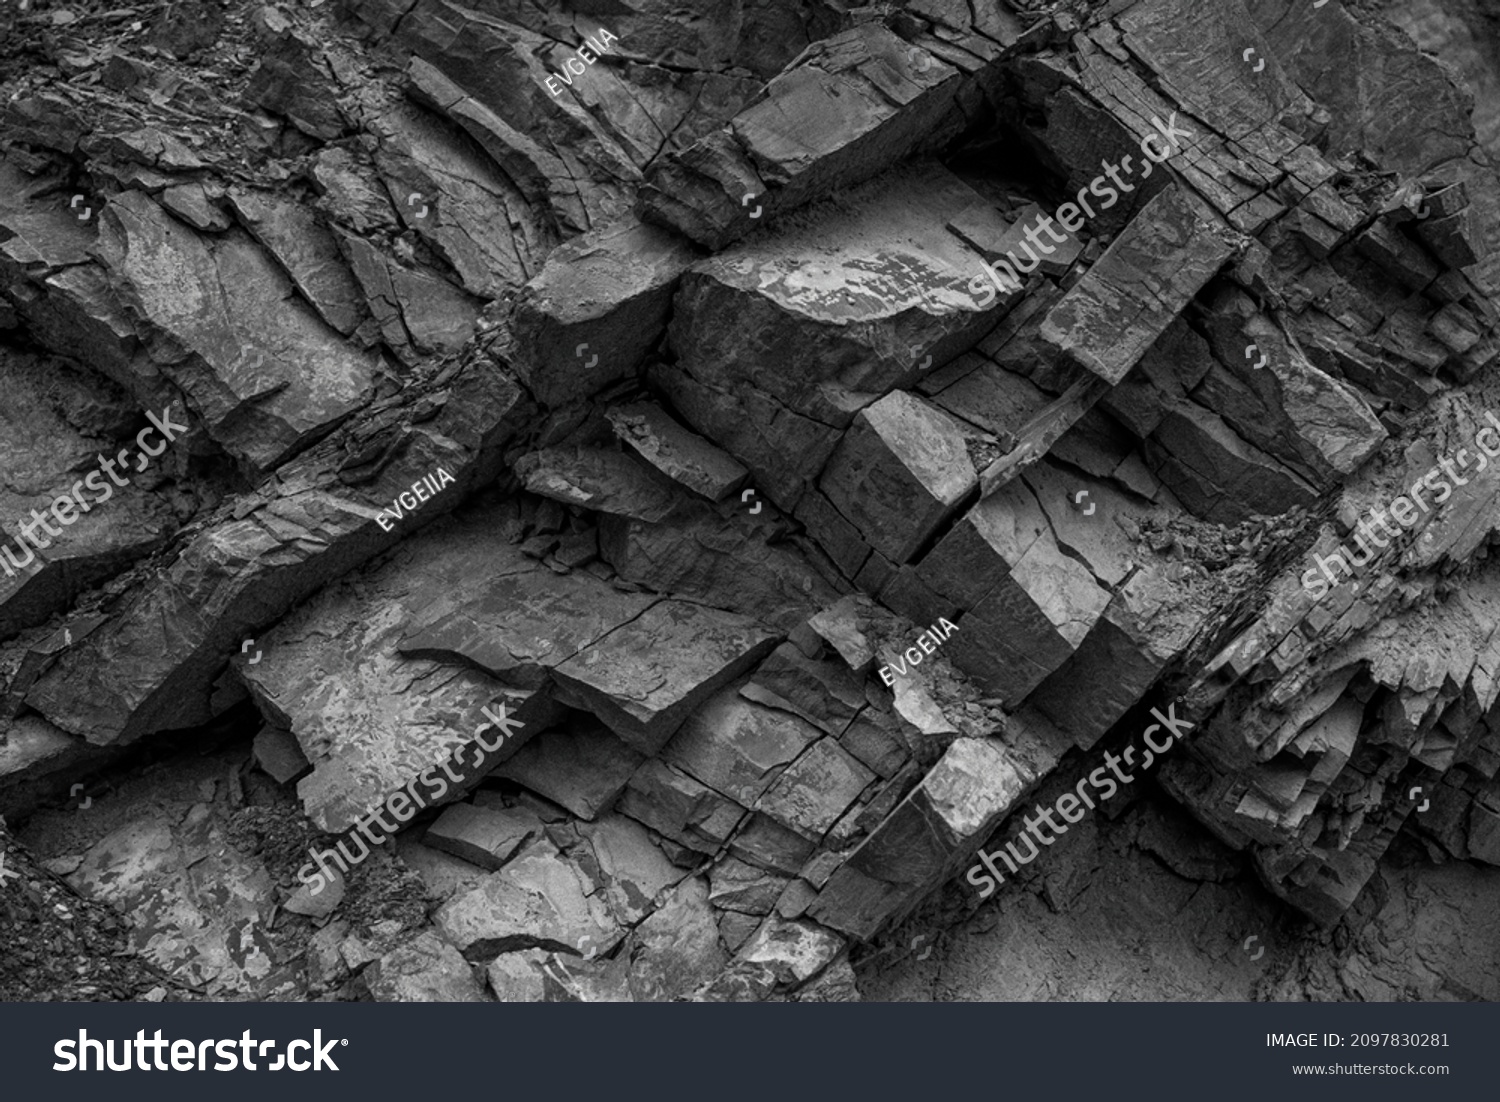 Texture, background layers and cracks in sedimentary rock on cliff face. Cliff of rock mountain. Rock slate in the mountain. Seamless abstract background. Cracks and layers of sandstone.
 #2097830281